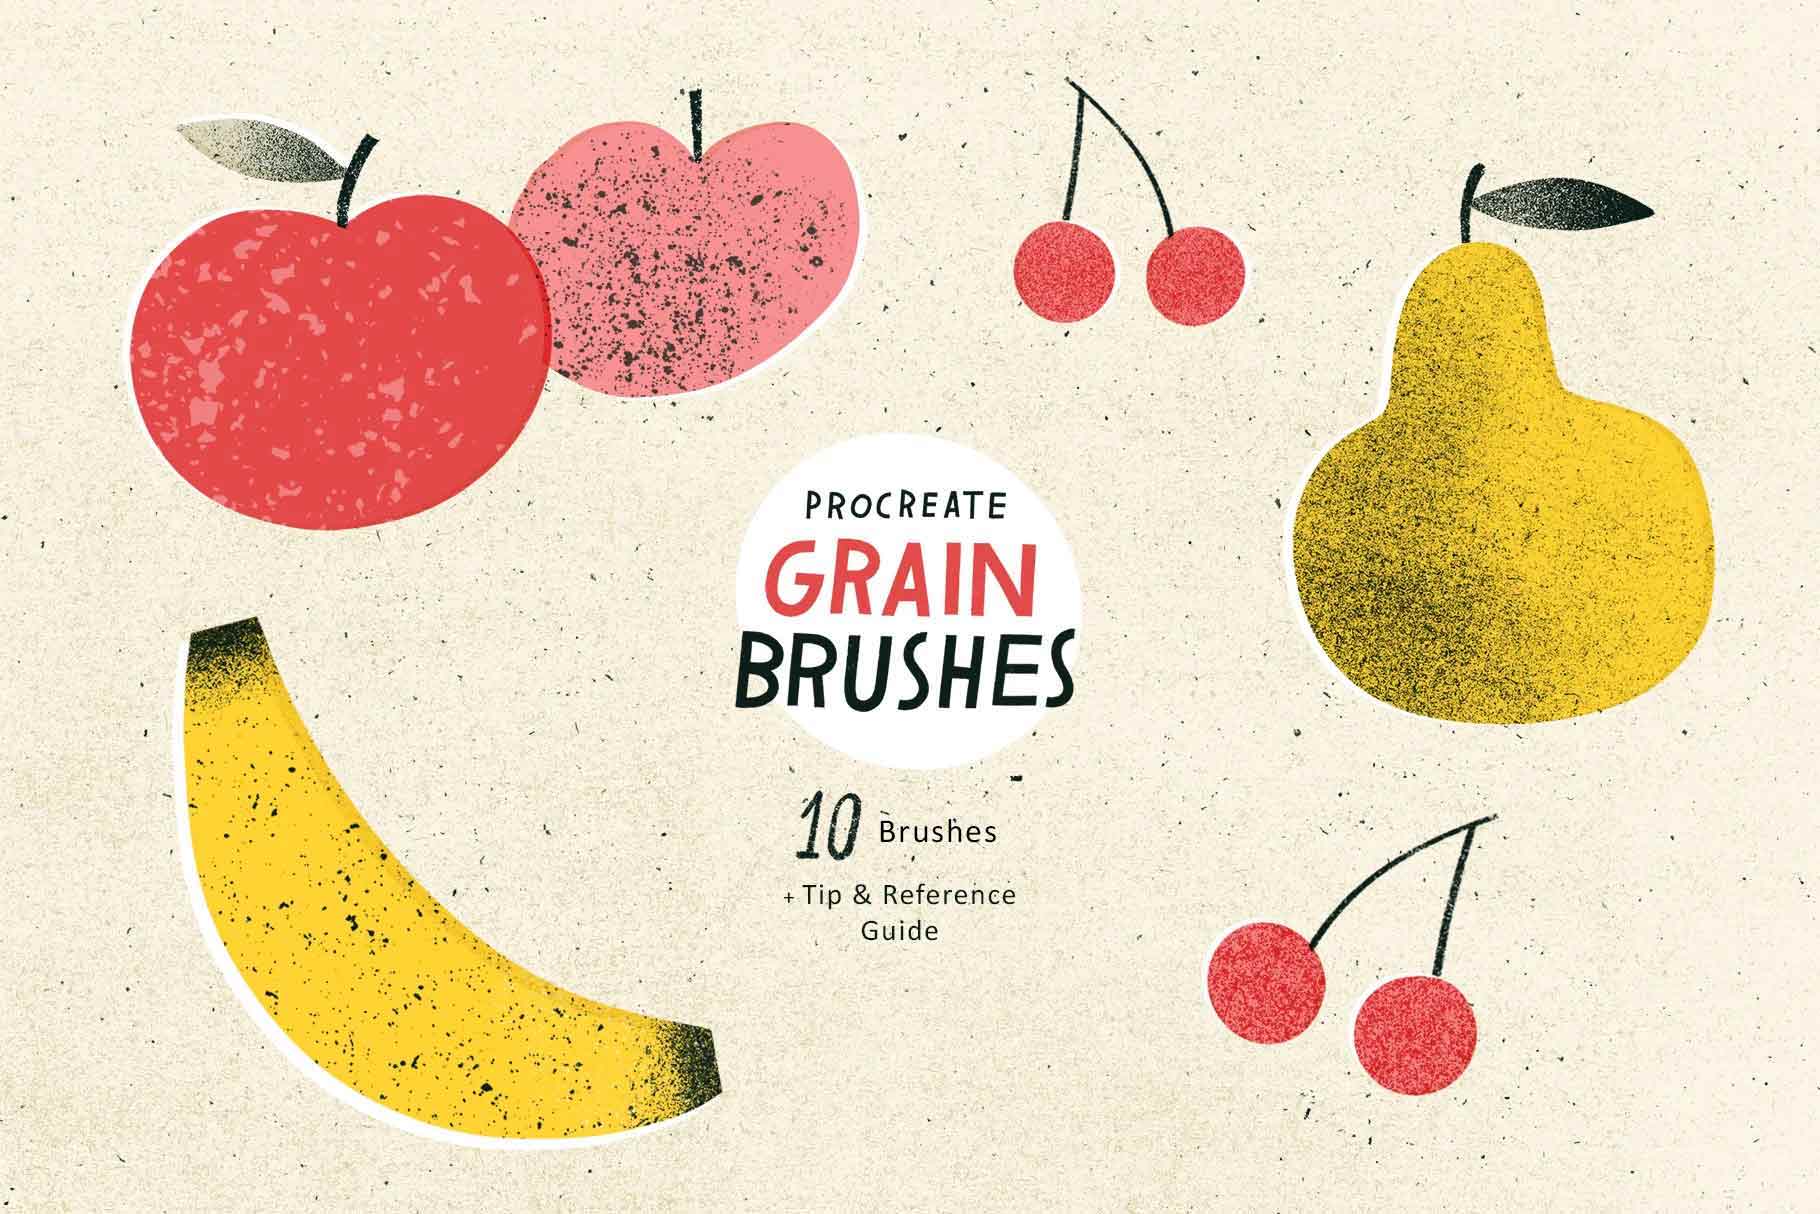 Procreate Grain Brushes and Reference Guide by Essi Kimpimaki Illustration.